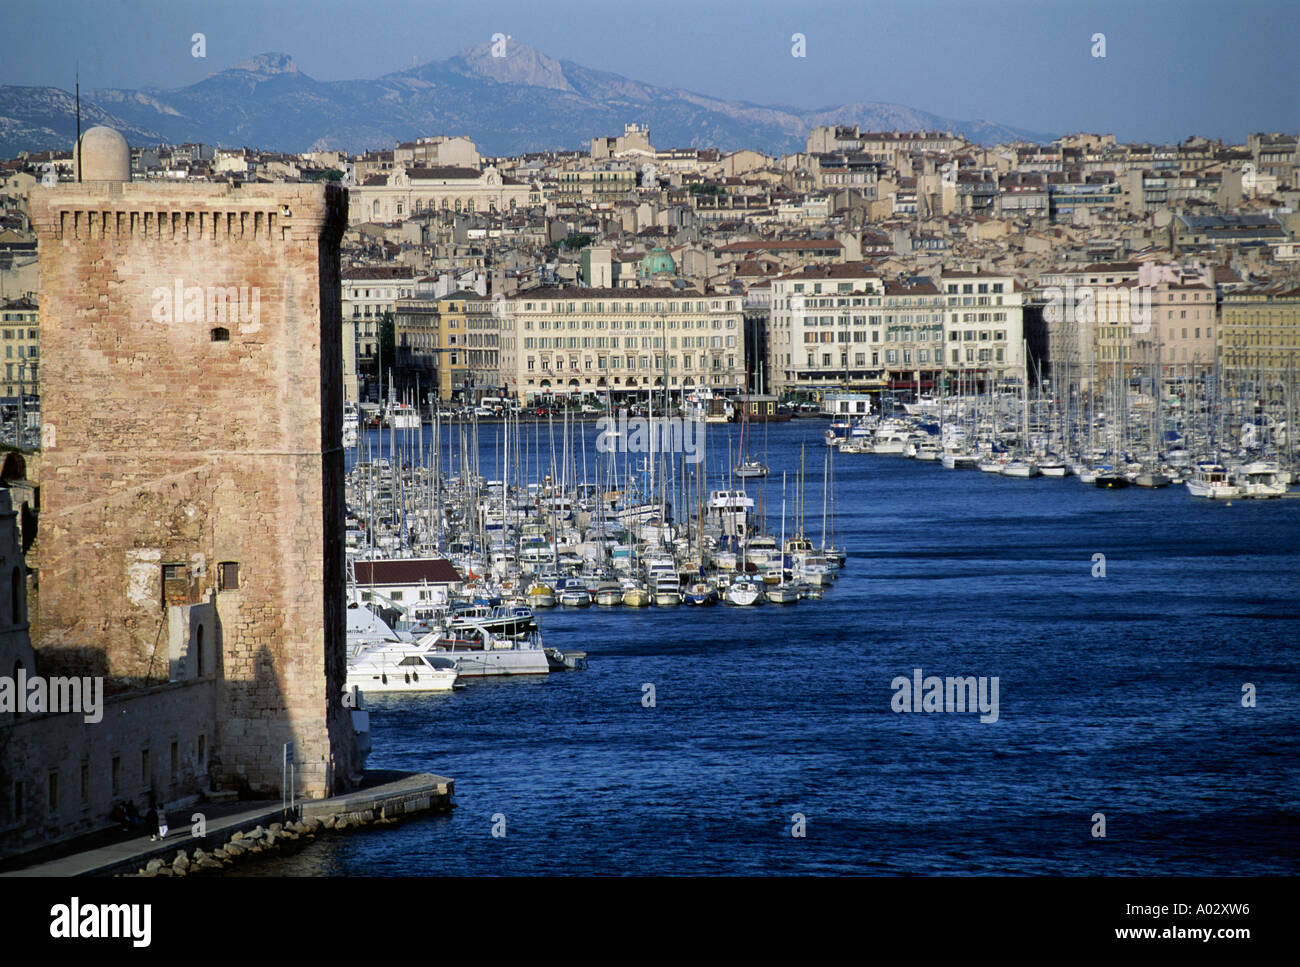 Entrance to the Old Port of Marseille, France. Stock Photo